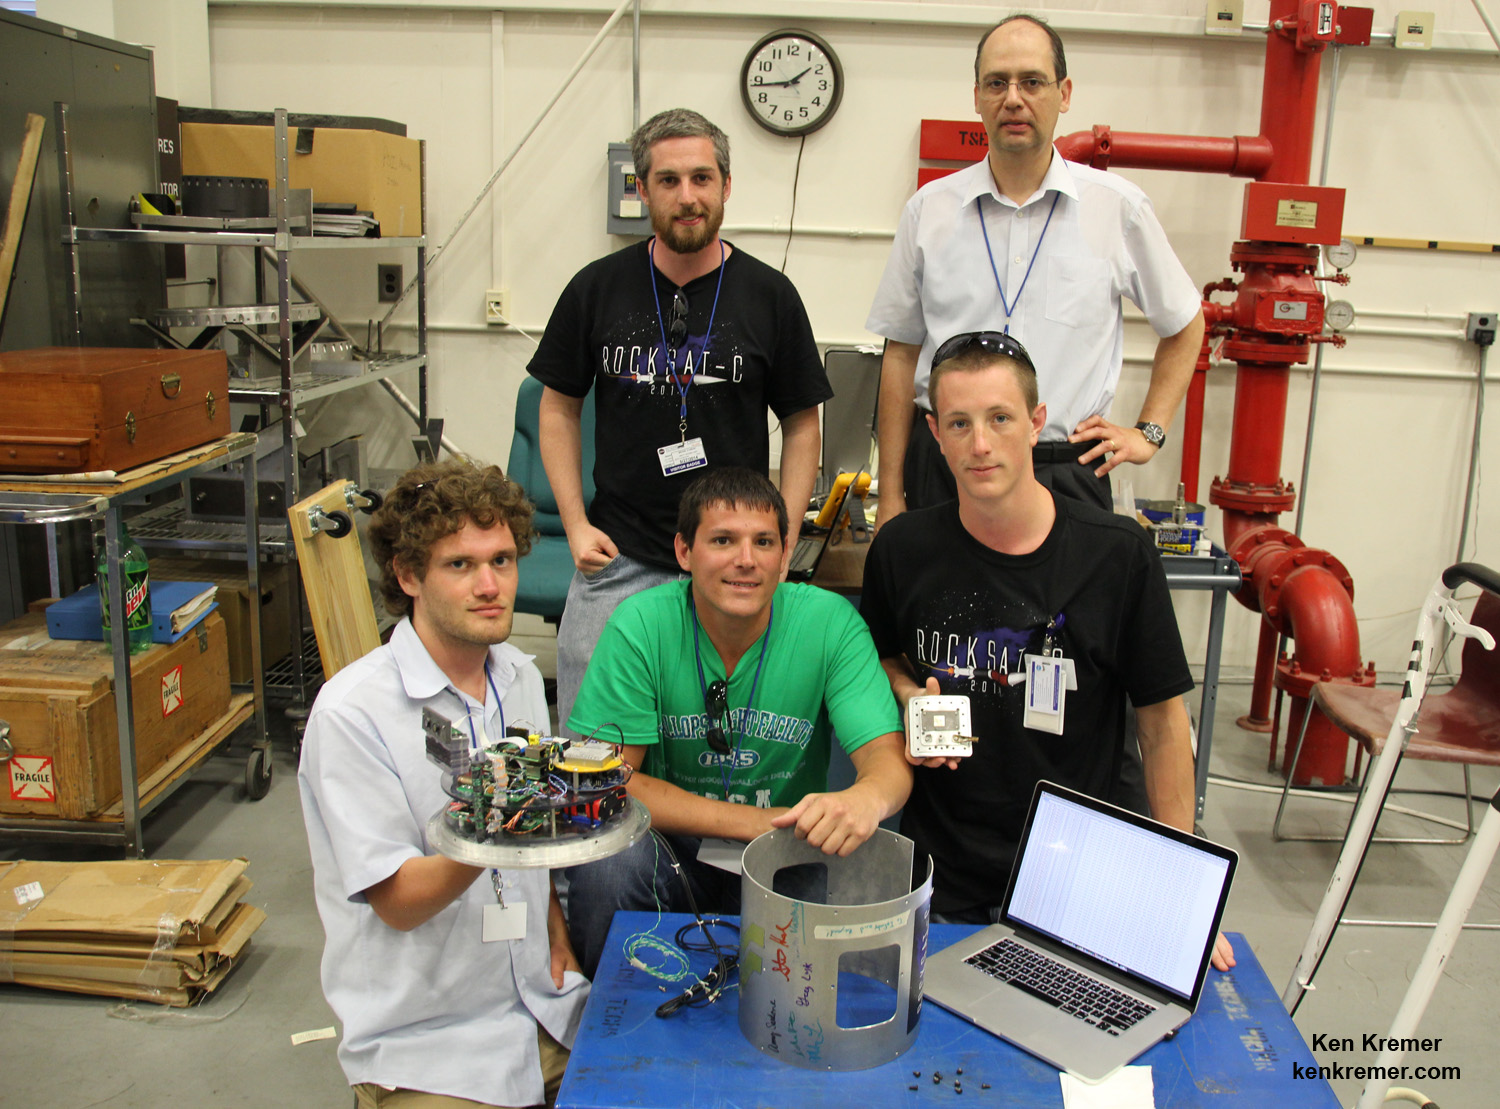 This RockSat-C team from West Virginia University, Morgantown measured Earth’s plasma density and rocket flight dynamics during the June 26, 2014 RockOn launch from NASA Wallops and is led by Dimitris Vassiliadis, Research Associate Professor (top right). Student members include Steven Hard, masters student,  Greg Lusk: electrical engineering,  Josh Hiett: applied physics,  Michael Lindon: plasma physics, Amy Sardone, physics (not shown).  Credit: Ken Kremer - kenkremer.com/AmericaSpace